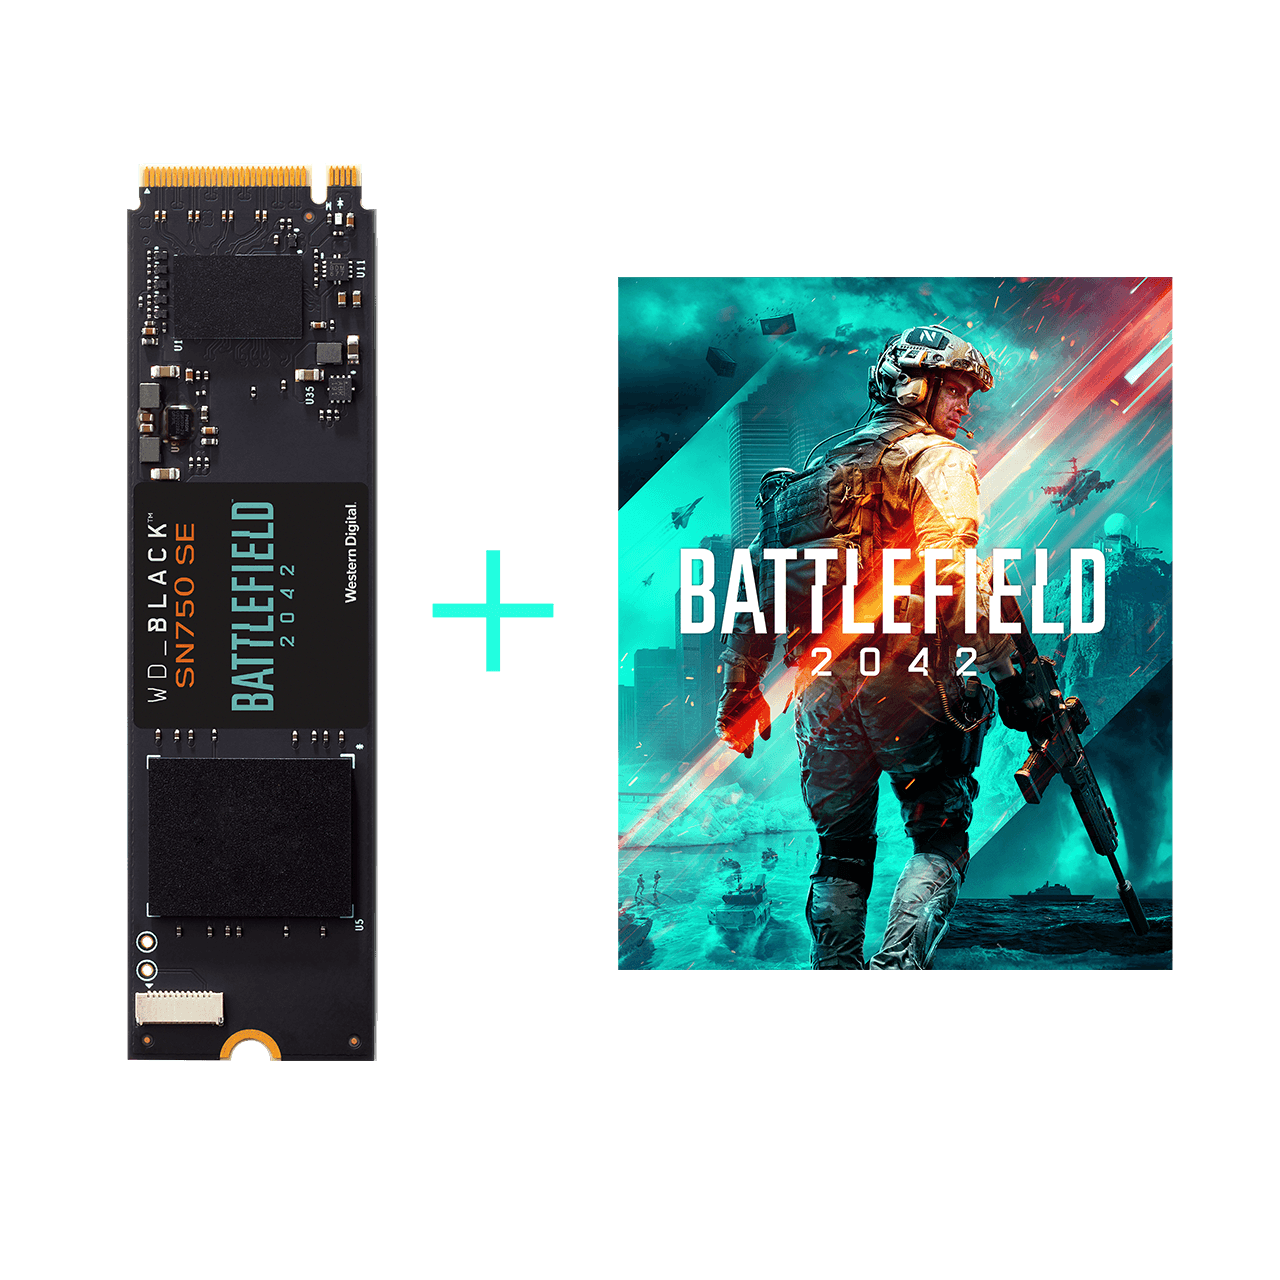 Beef up your arsenal with this speedy WD_BLACK SSD and get Battlefield 2042 bundled in thumbnail